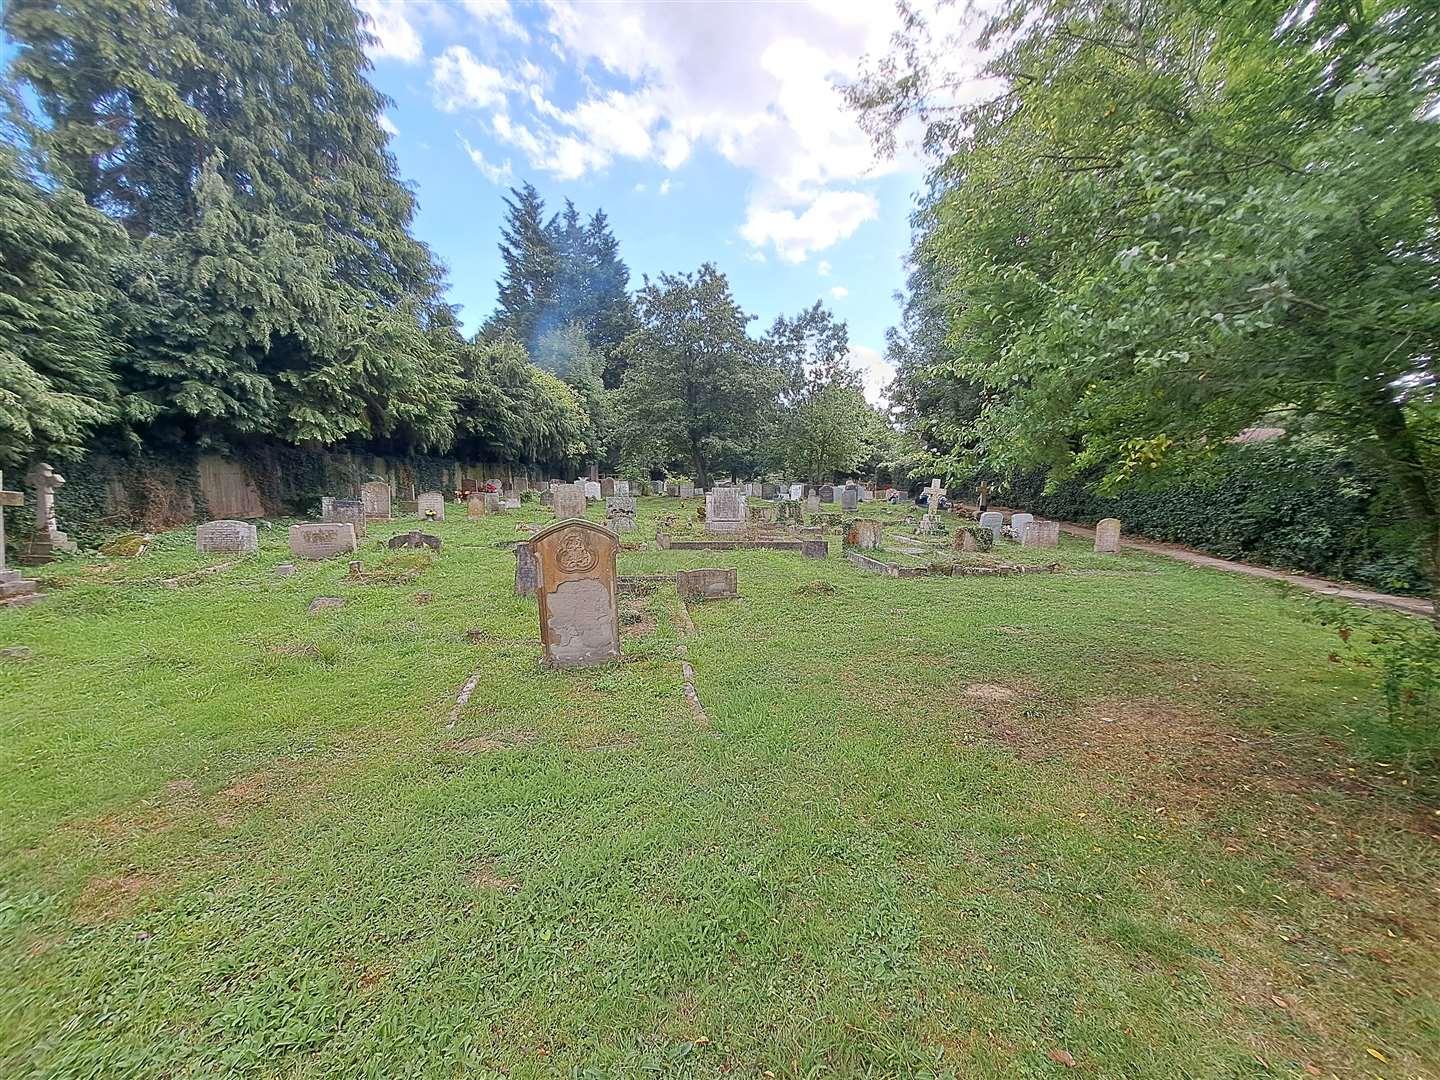 The graveyard to the rear of the church